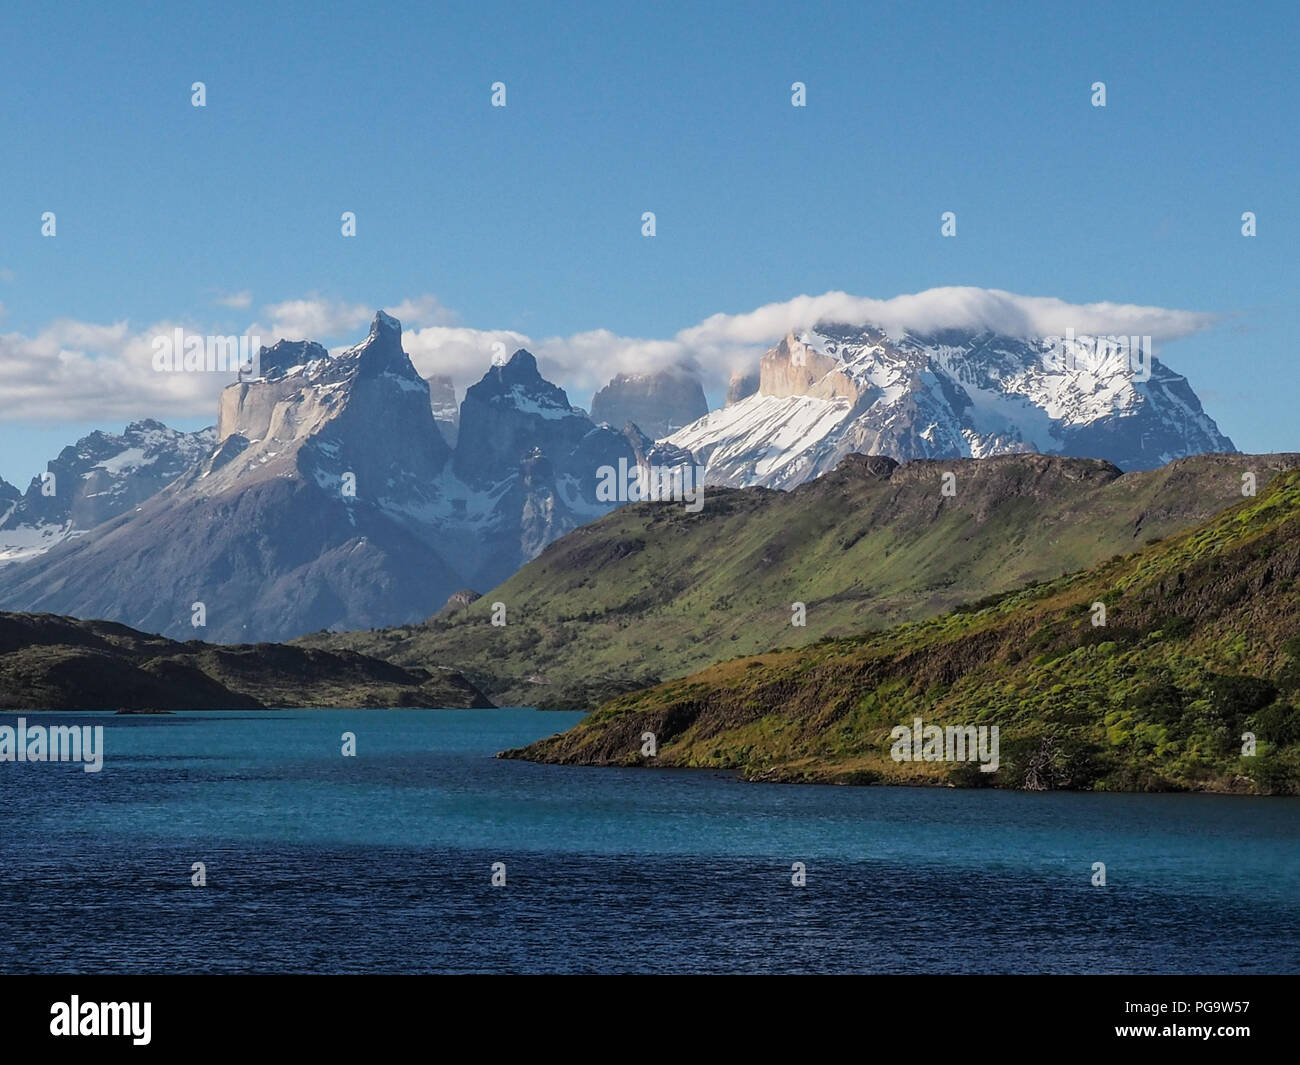 Torres del Paine National Park (spanish: Parque Nacional Torres del Paine) with the  Towers of Paine and Paine Horns, southern Chilean Patagonia. Stock Photo